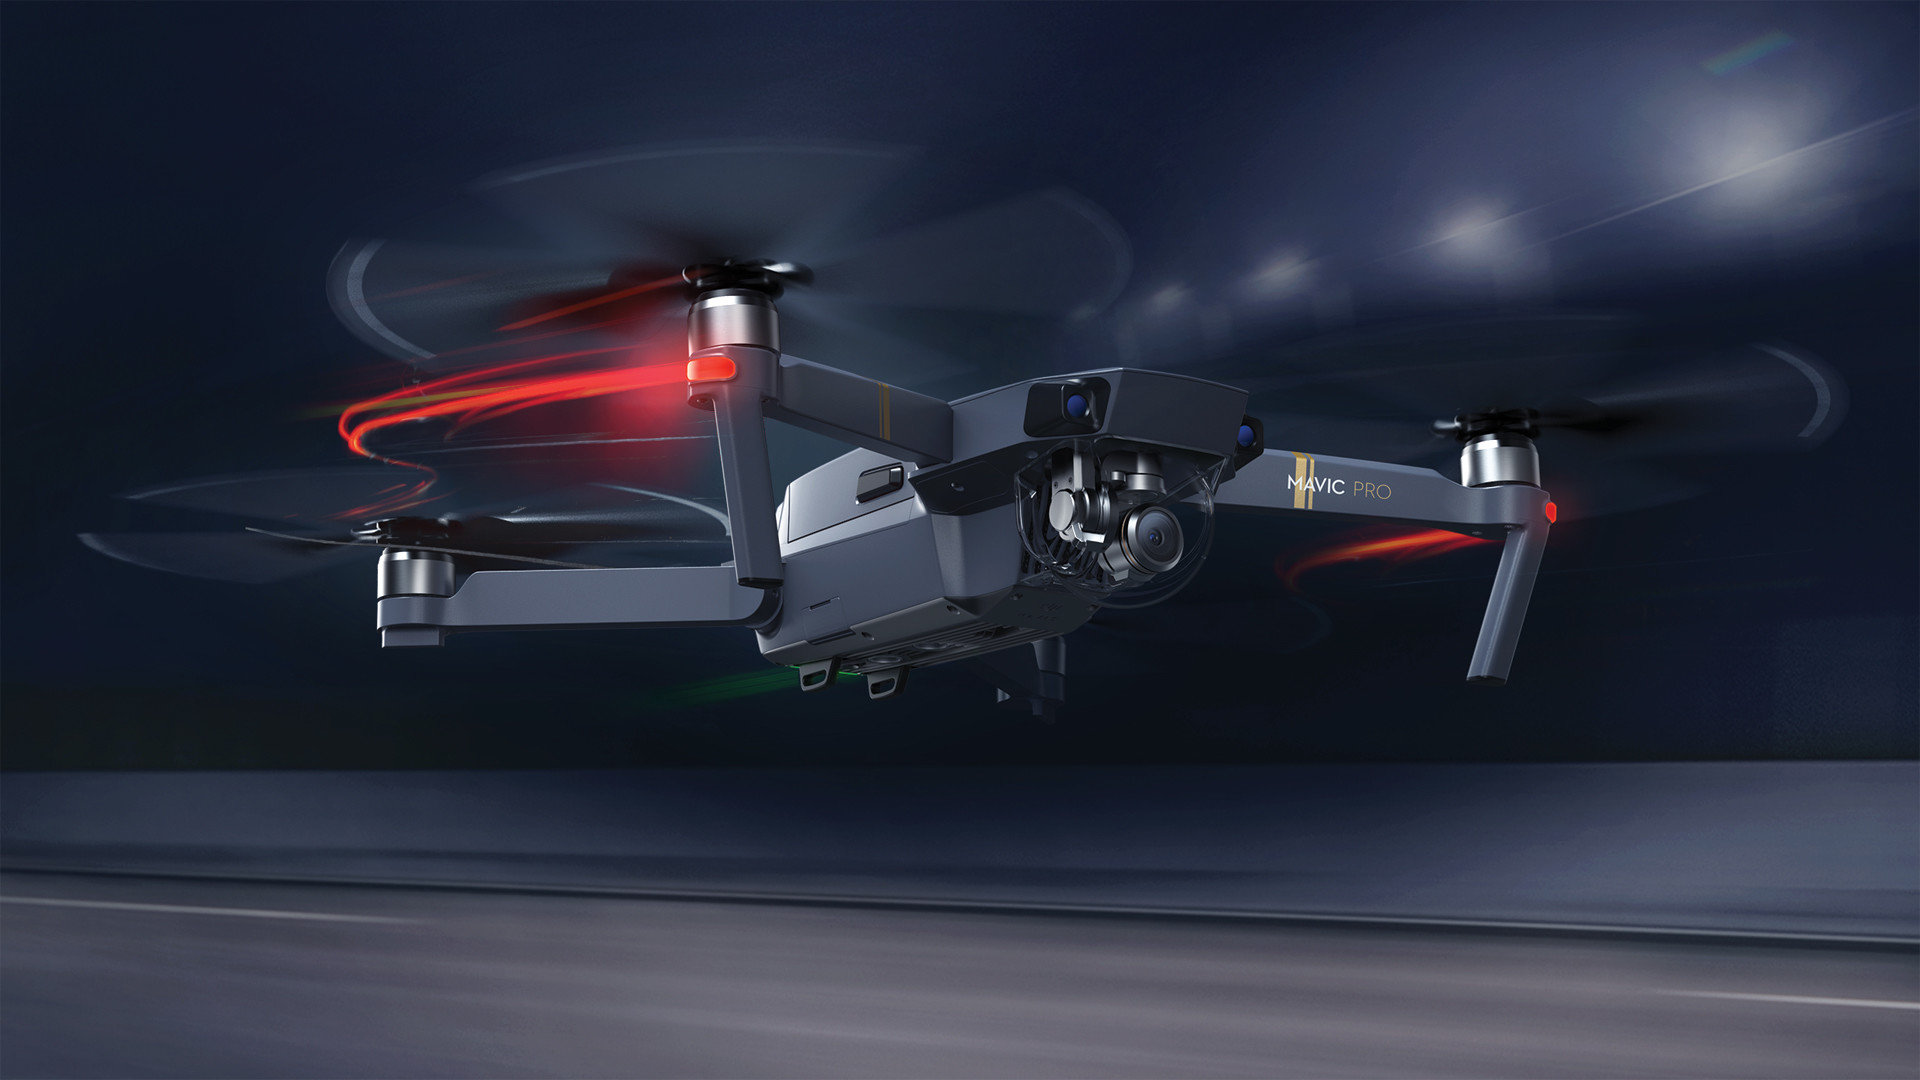 1920x1080 DJI Introduces Mavic Pro: Foldable and Portable Drone with 4K Camera